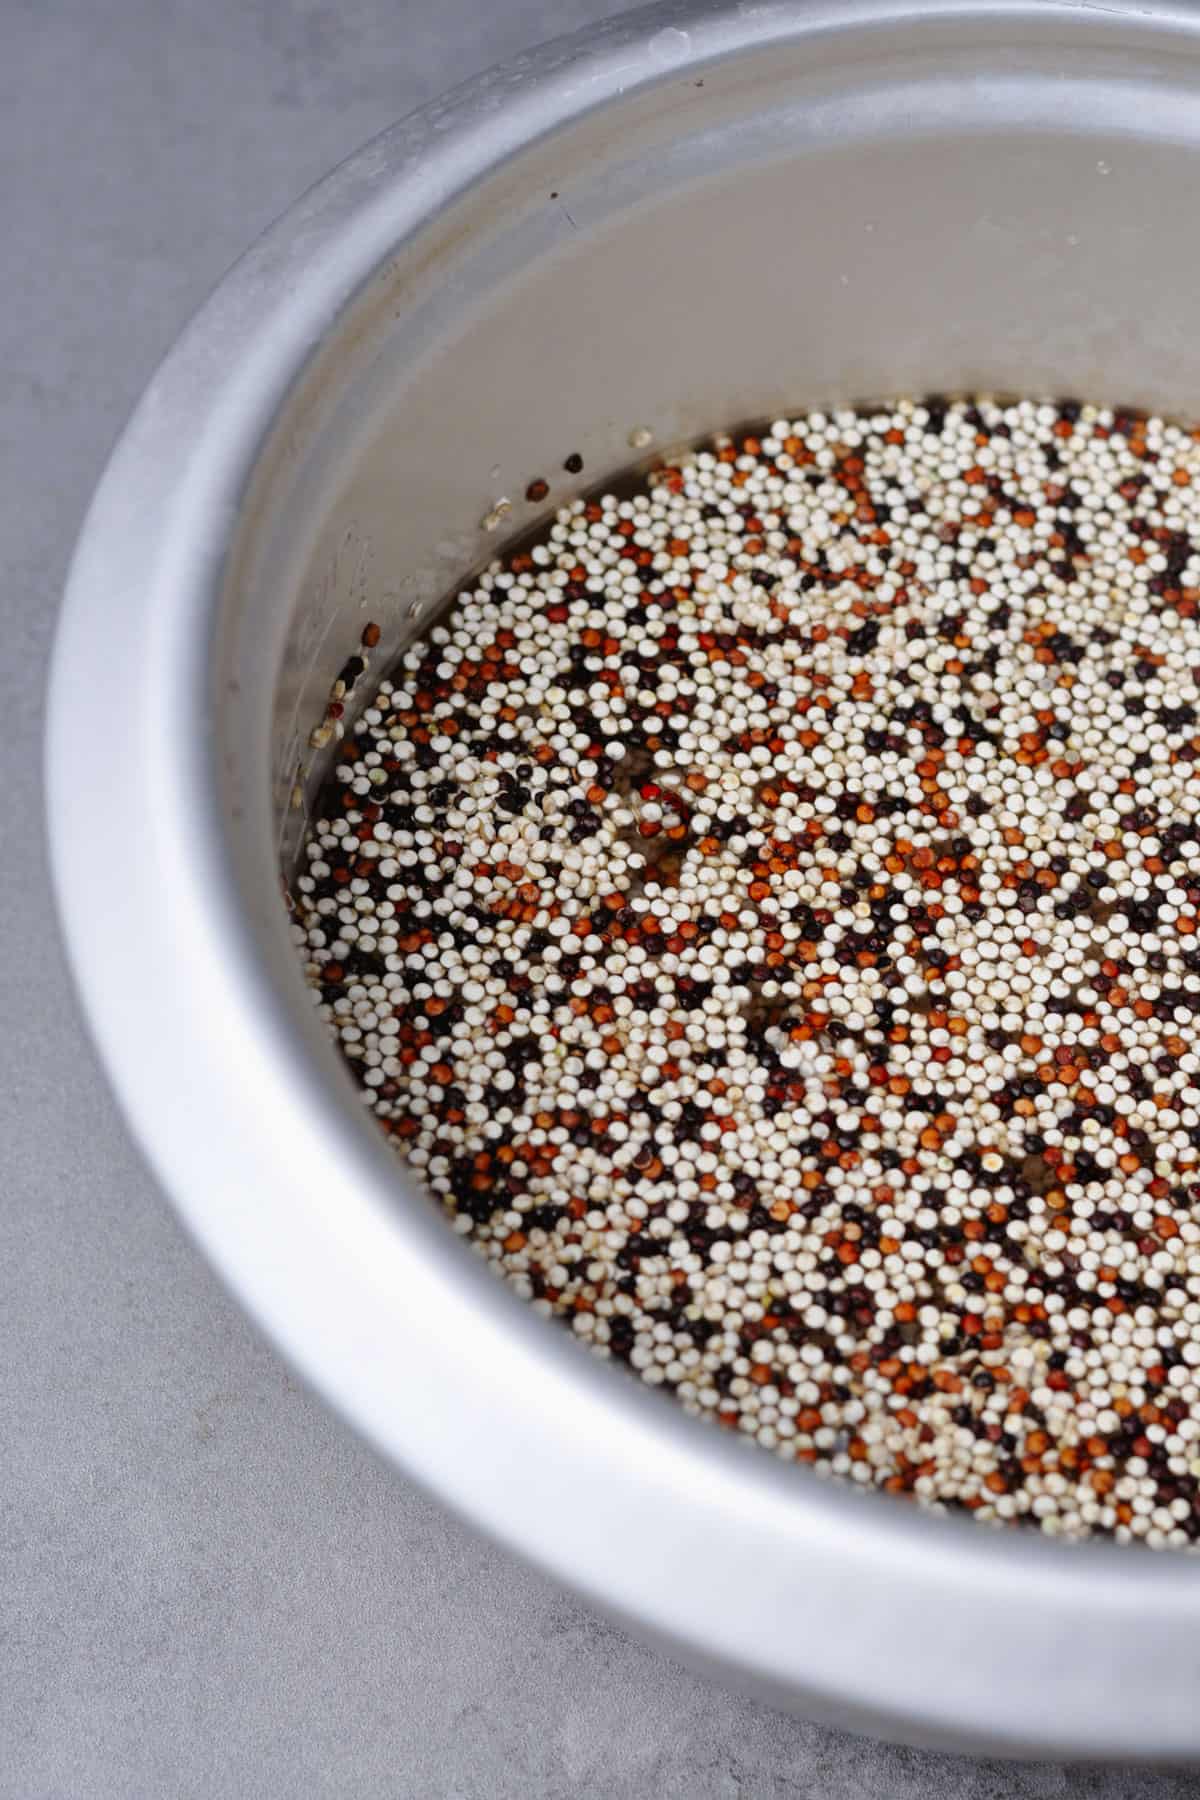 Tri-color quinoa and water in a rice cooker